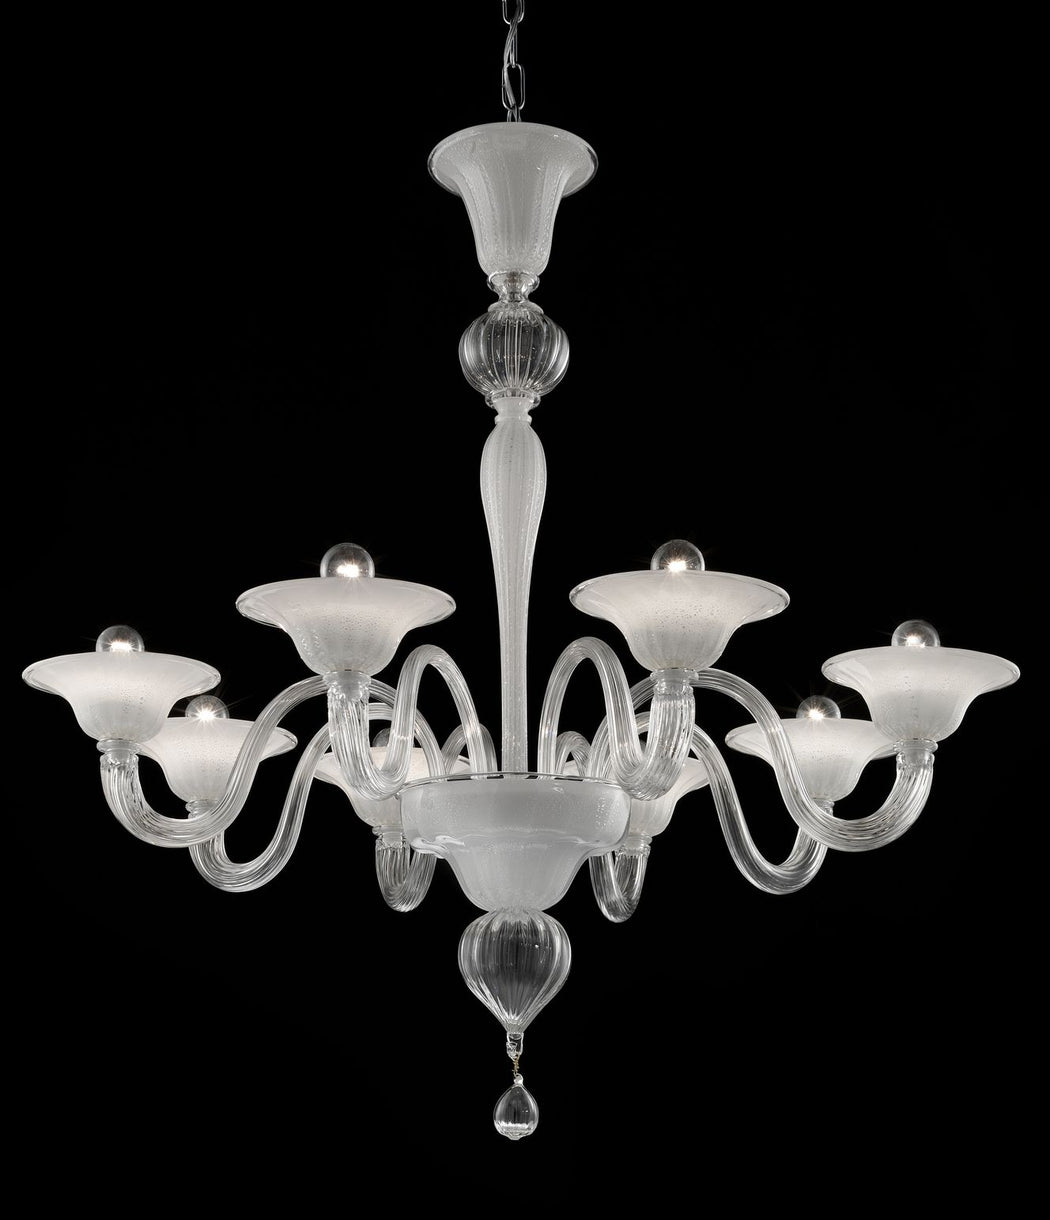 Elegant silvery white Venetian glass chandelier with tiny bubbles & 8 lights